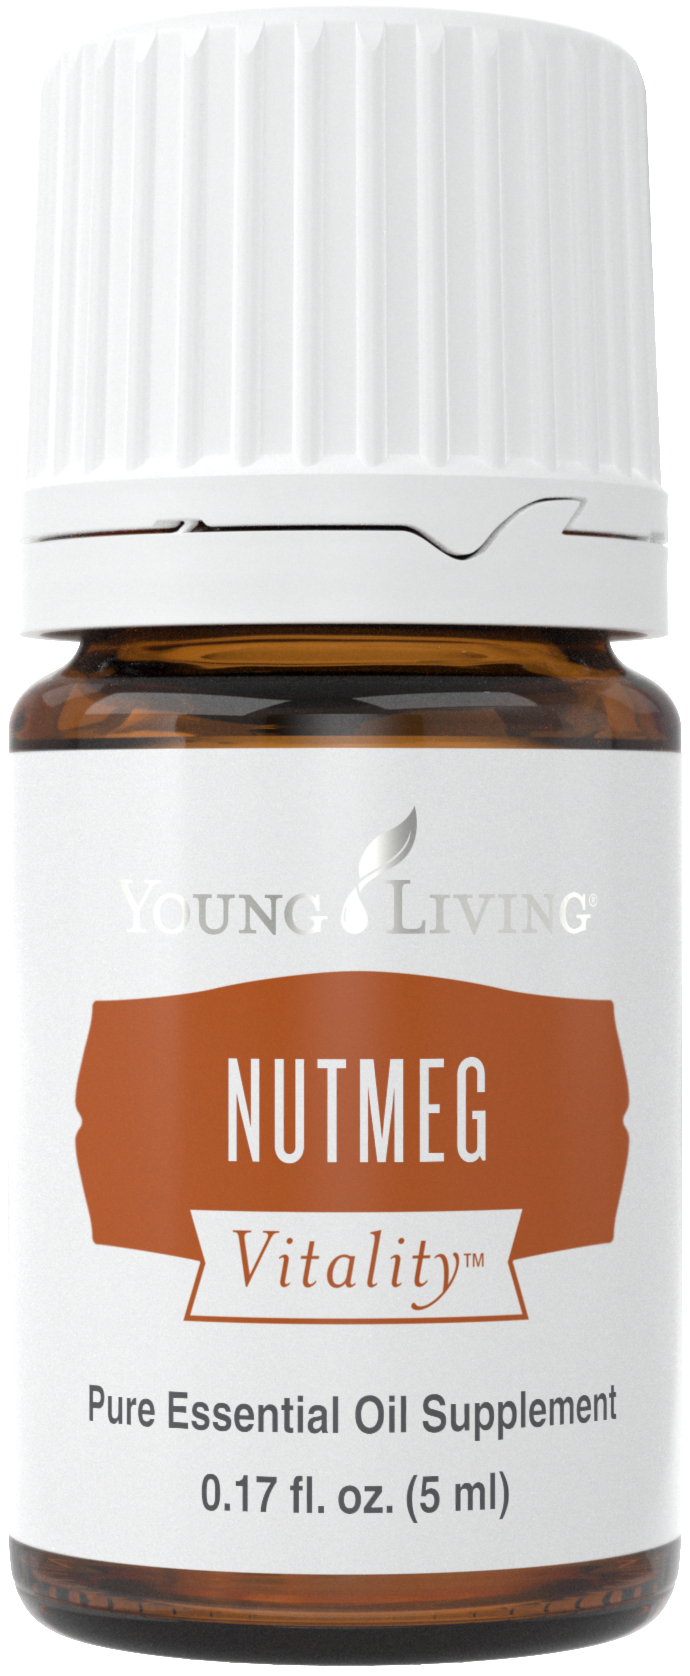 Nutmeg Vitality Essential Oil - Young Living Essential Oils 